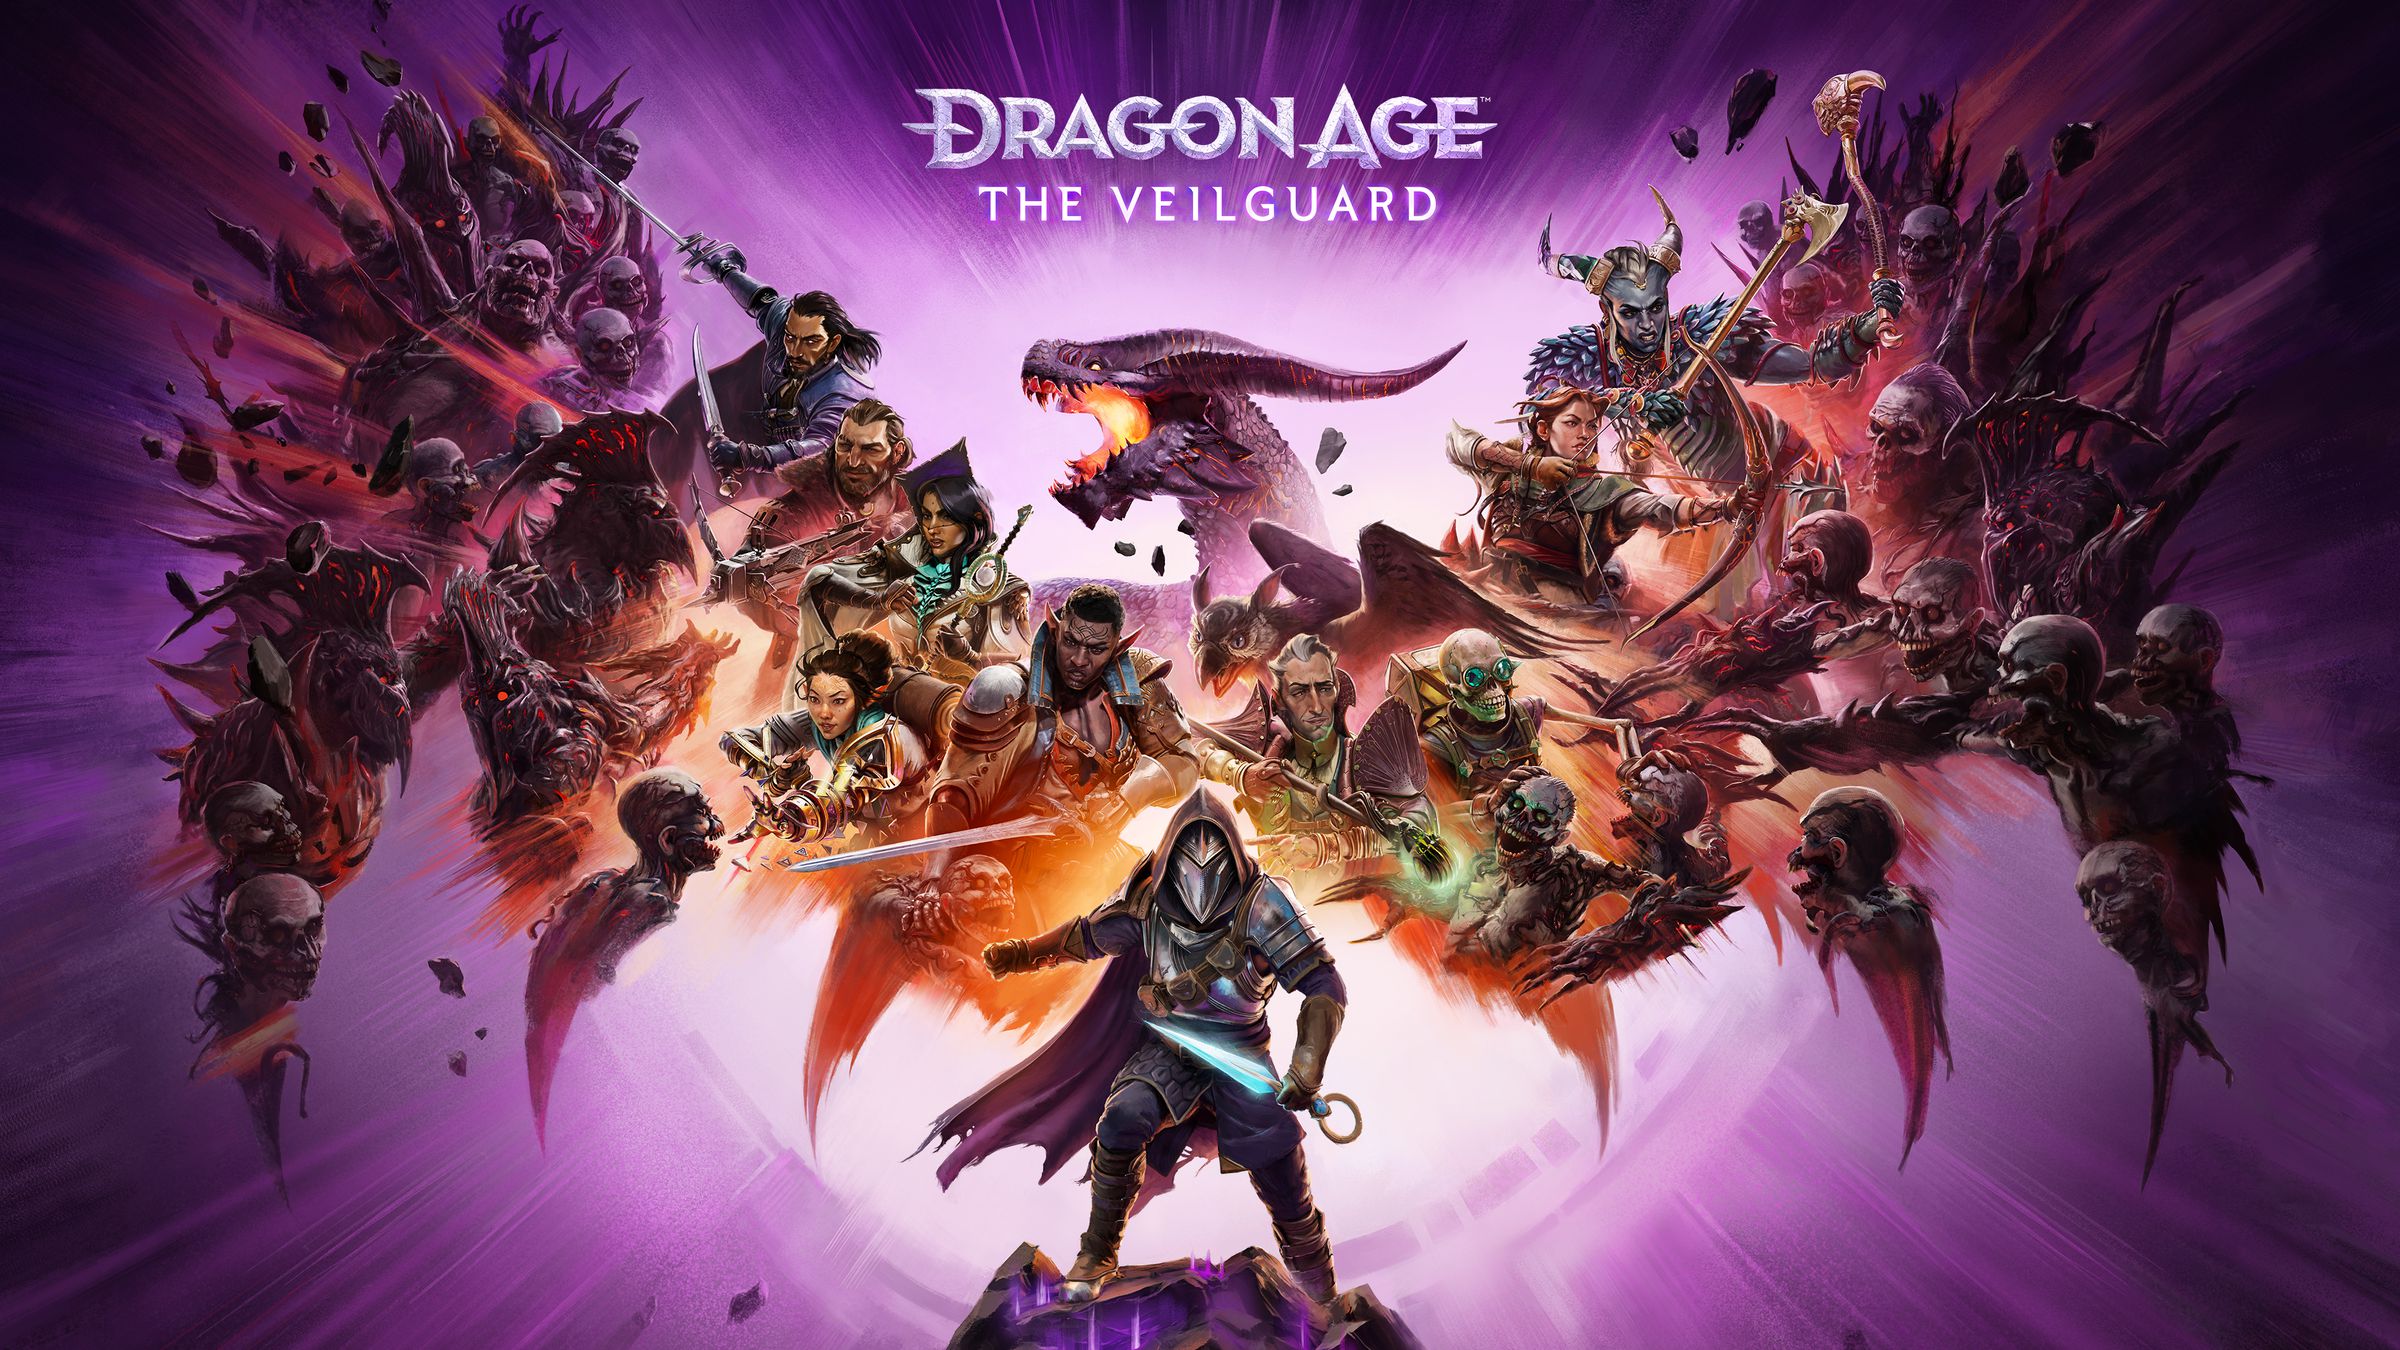 Dragon Age: The Veilguard has more magic, color, and customizations